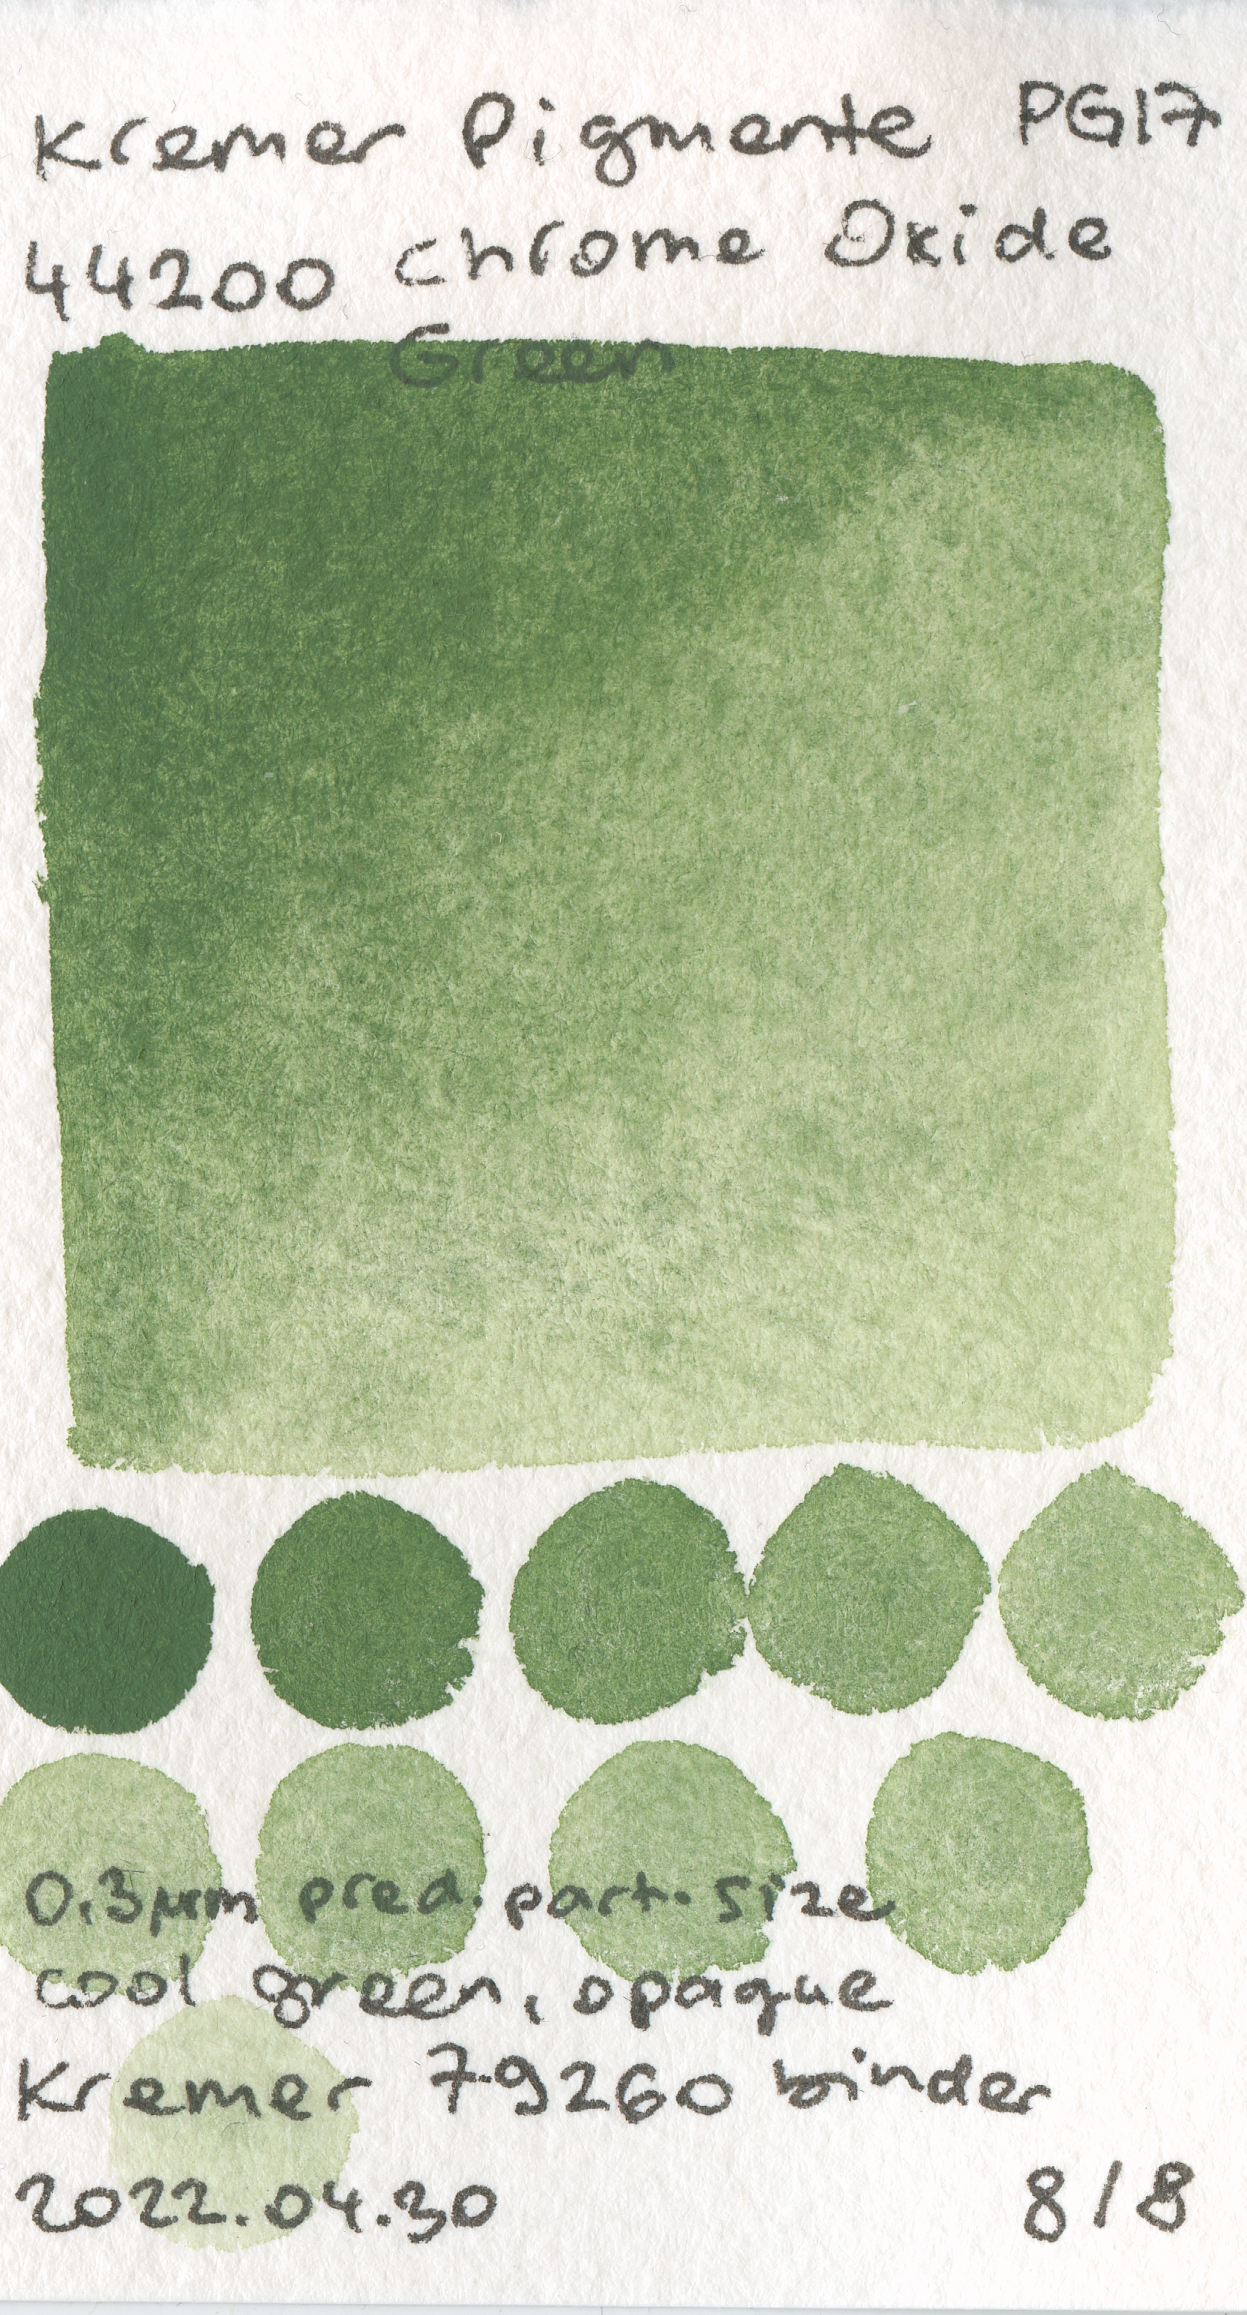 Kremer Pigmente [Dry] Pigments 44200 Chrome Oxide Green PG17 watercolor swatch